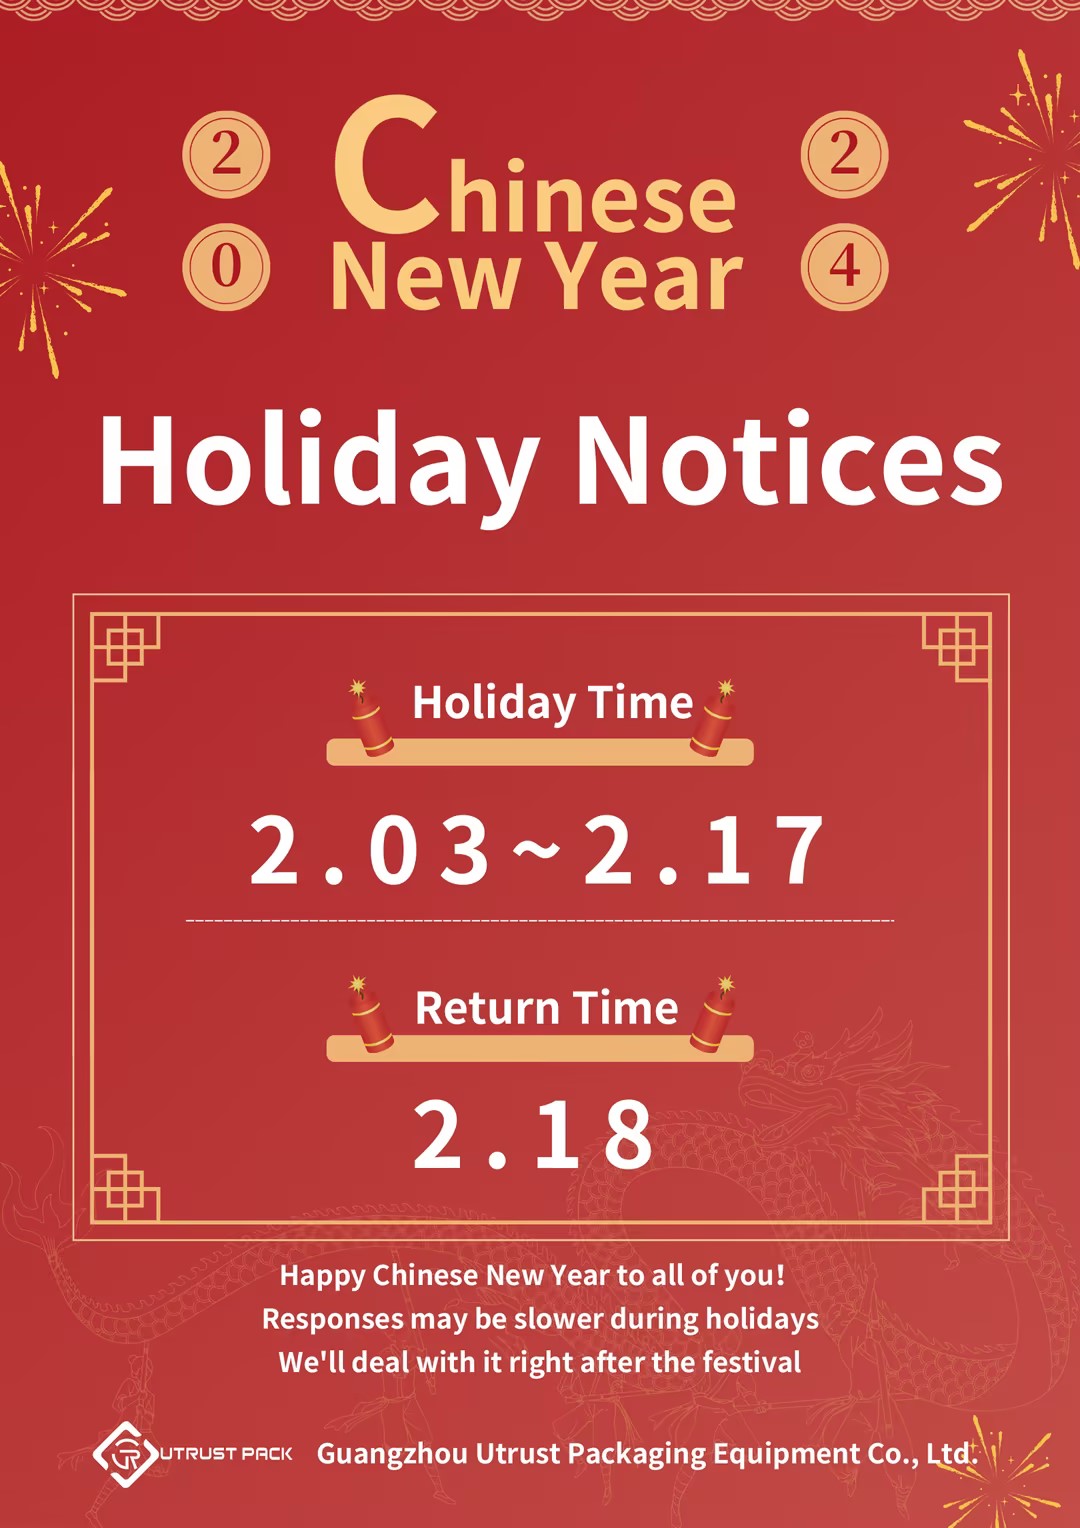 Holiday Notice! Happy Chinese New Year